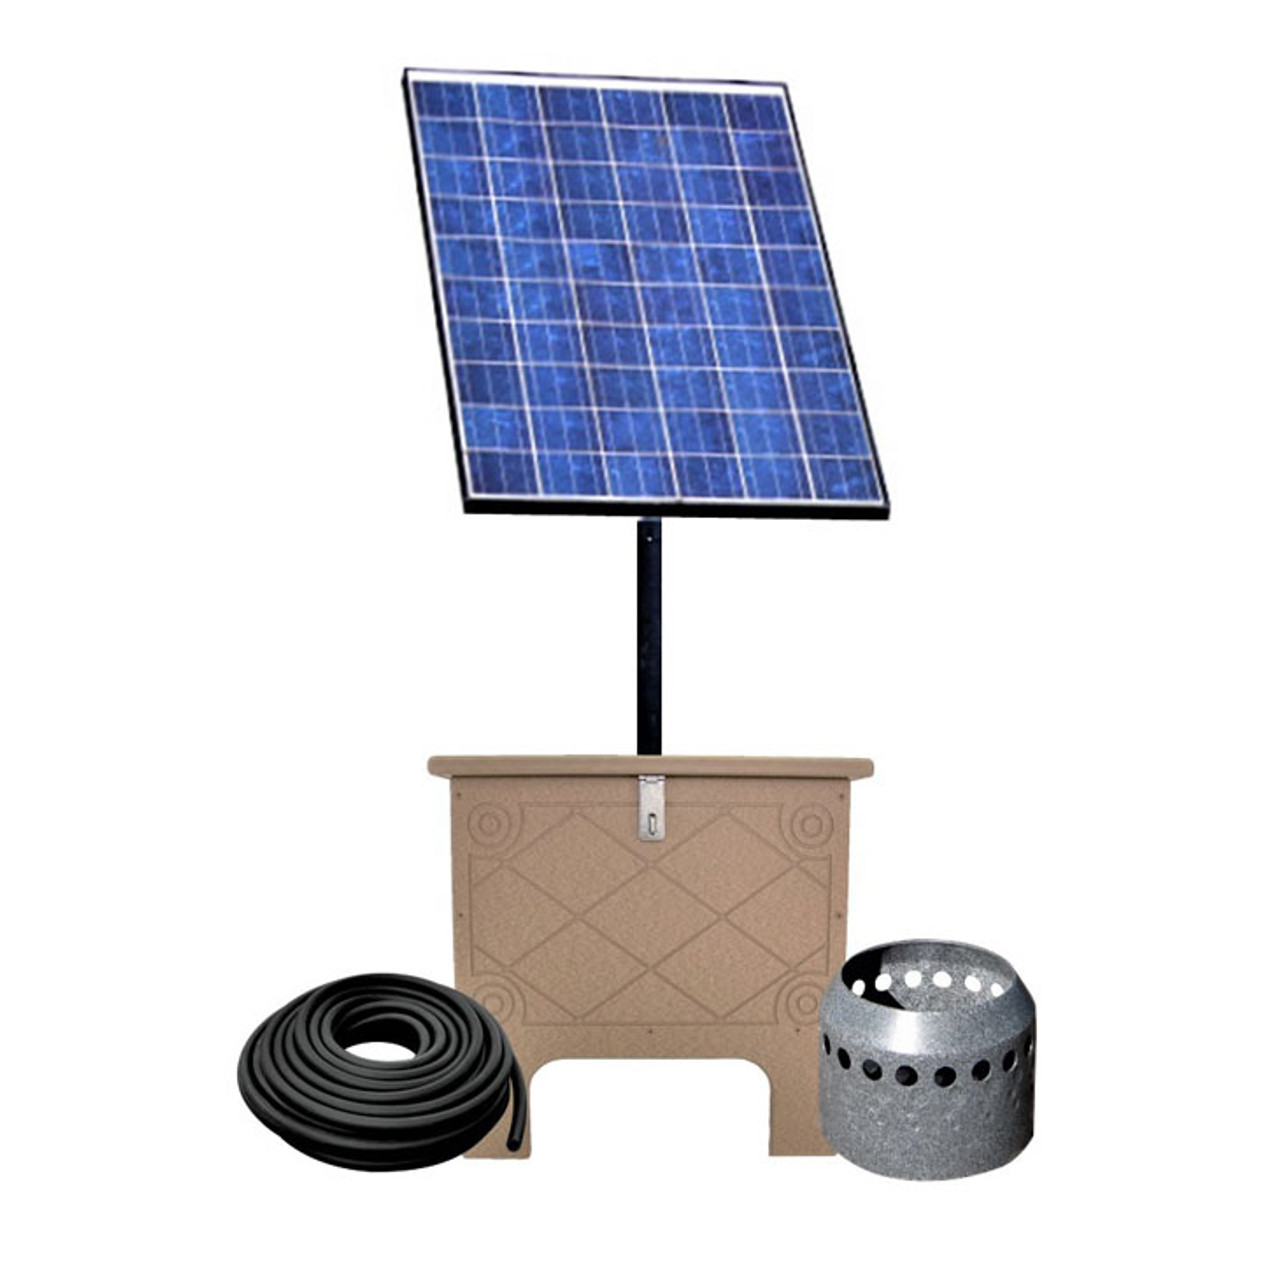 Solaer 1.1 Solar Lake Bed Aeration System w/ 1 Diffuser & Tubing (FREE SHIPPING)